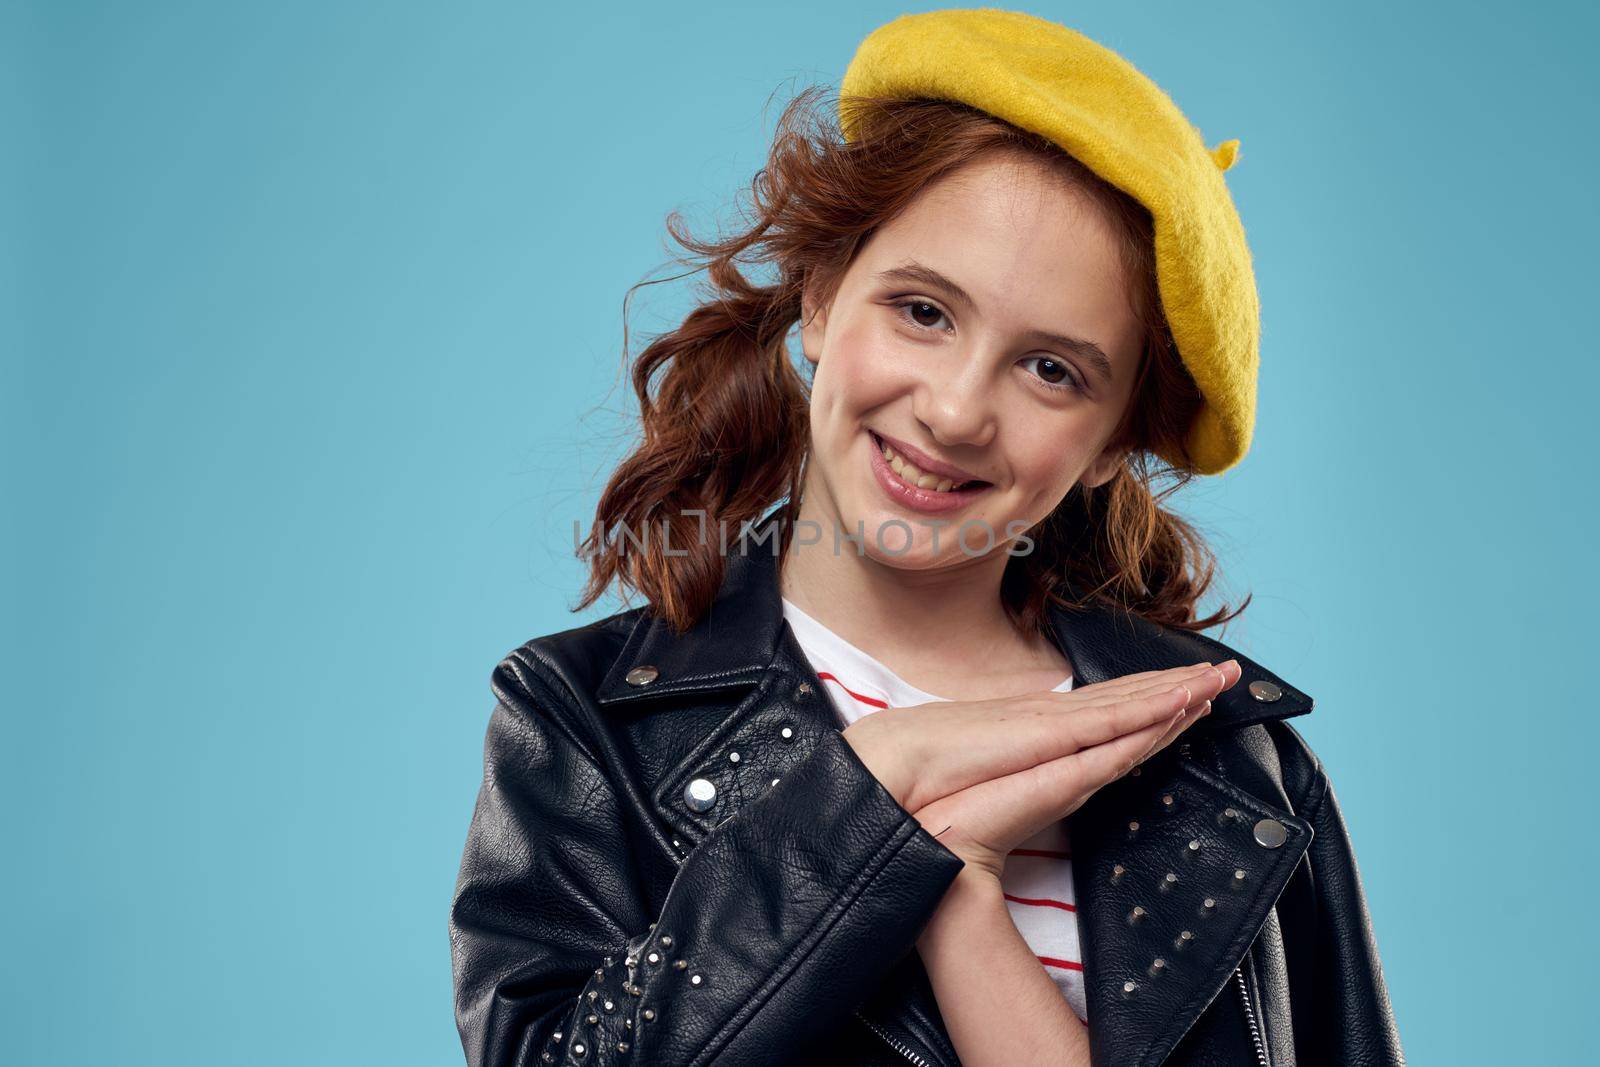 A fashionable girl in a leather jacket and a yellow hat on a blue background gestures with her hands emotions. High quality photo